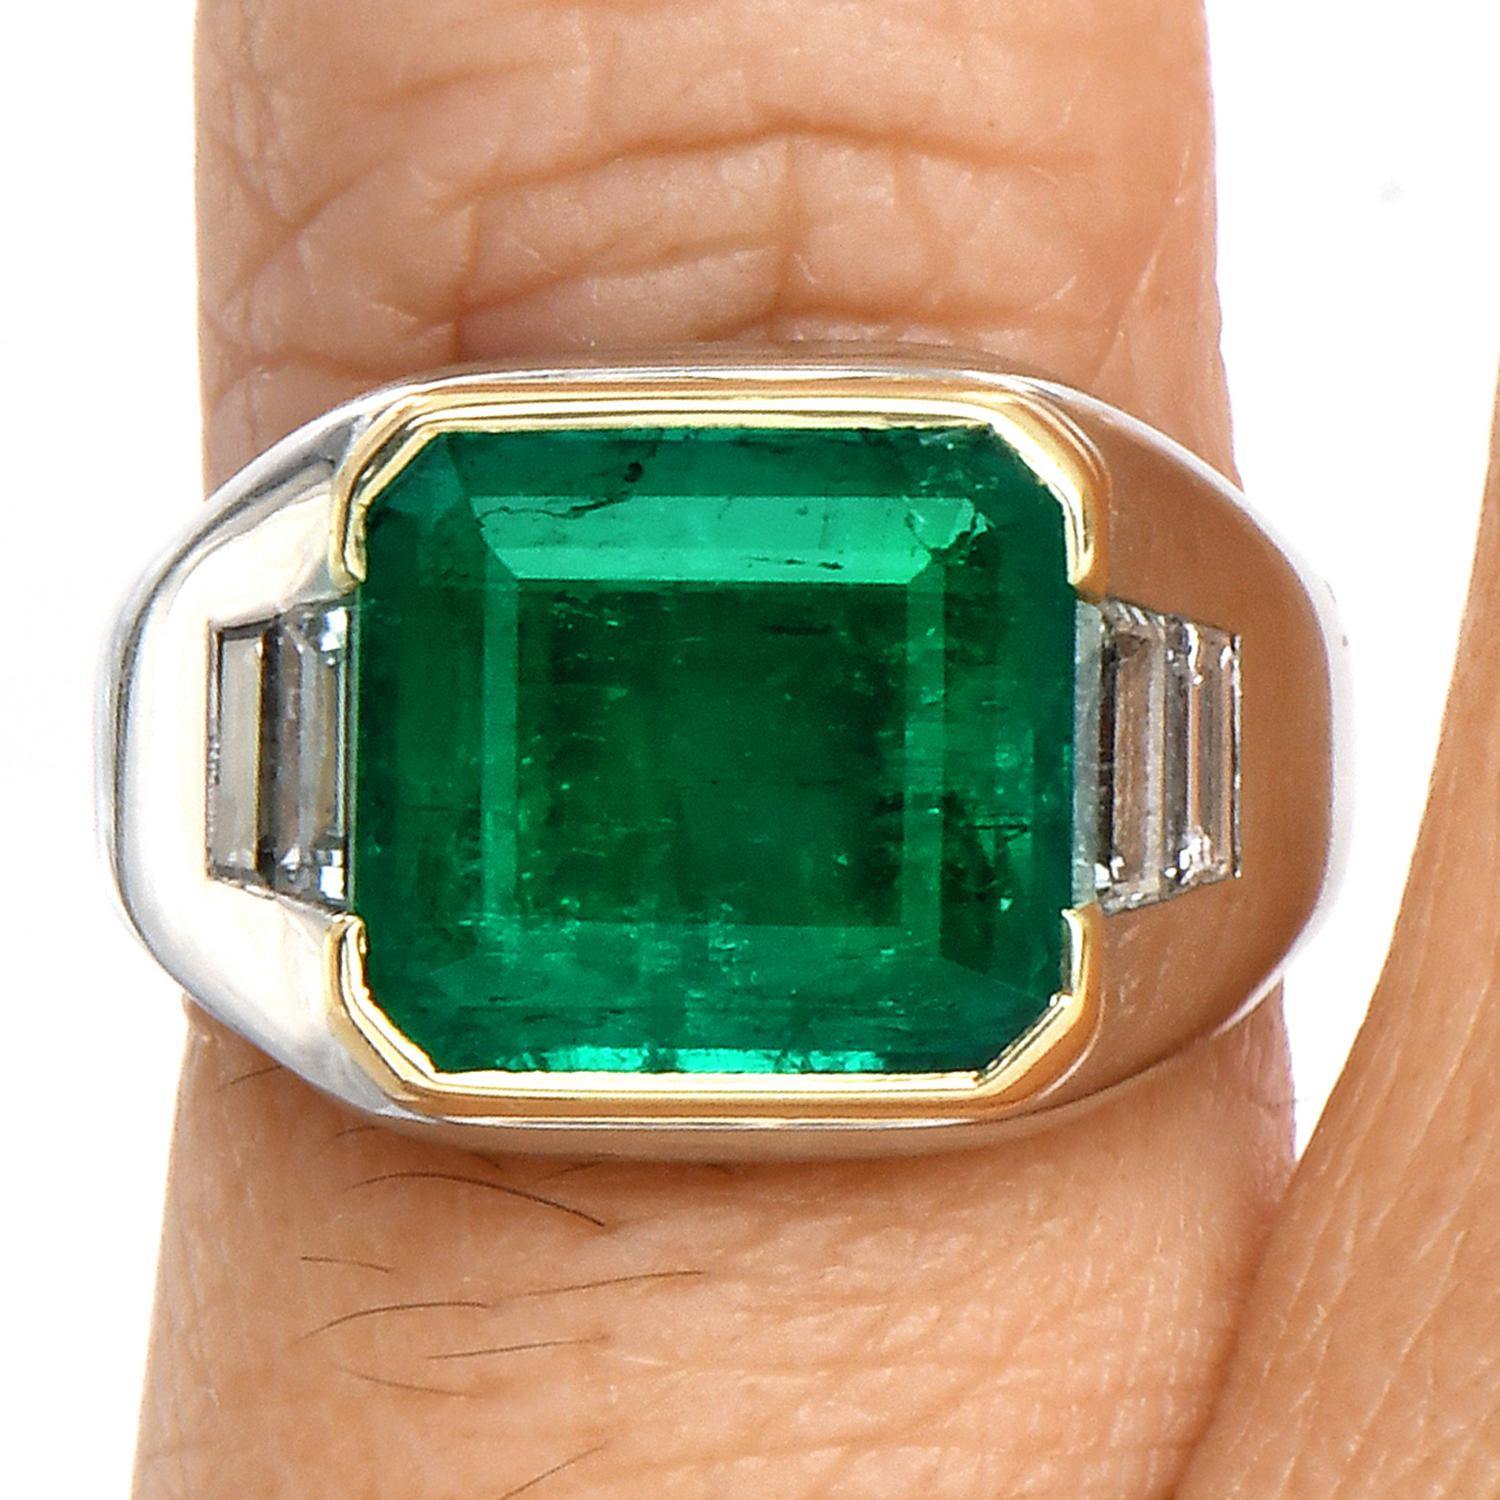 Rare Bvlgari emerald ring, which can be the perfect pinky ring for a gentleman or the modern cocktail ring for a lady.

This Exquisite Bvlgari Ring is crafted in luxurious Platinum,

topped with an 18K Yellow gold bezel for the emerald.

Centered